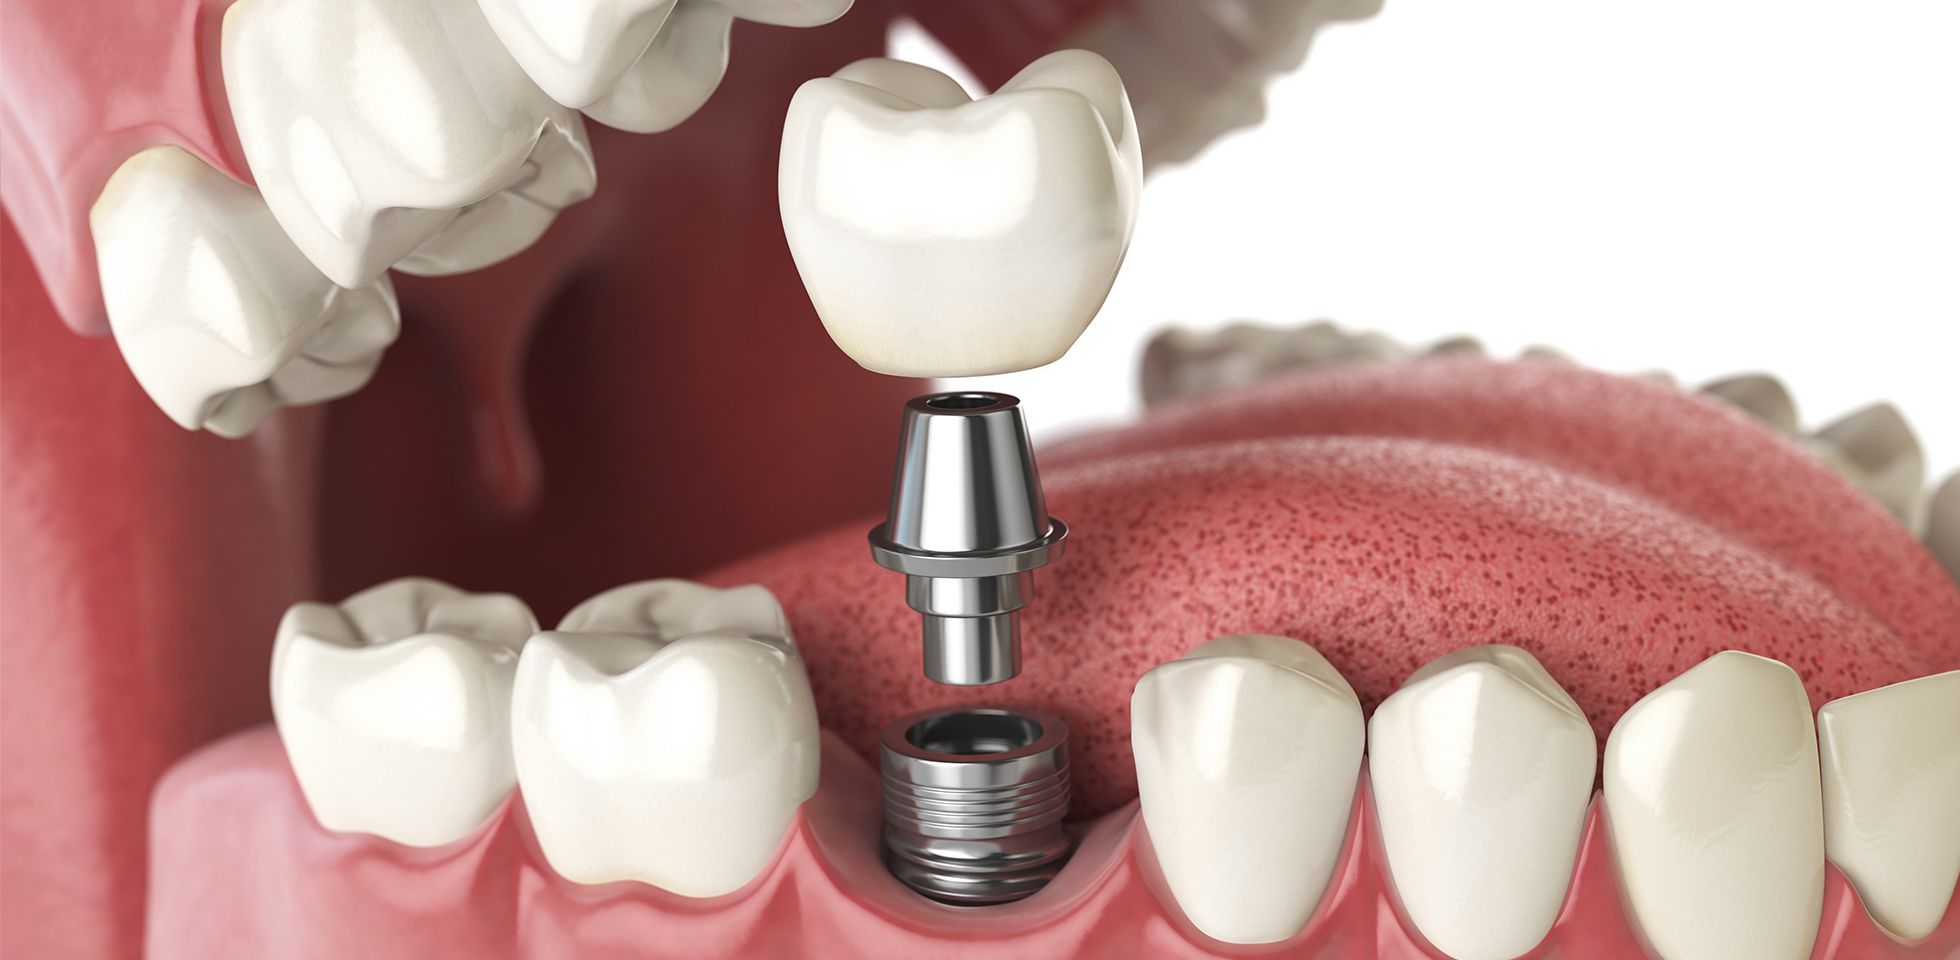 How to Take Proper Care of Your Dental Implants